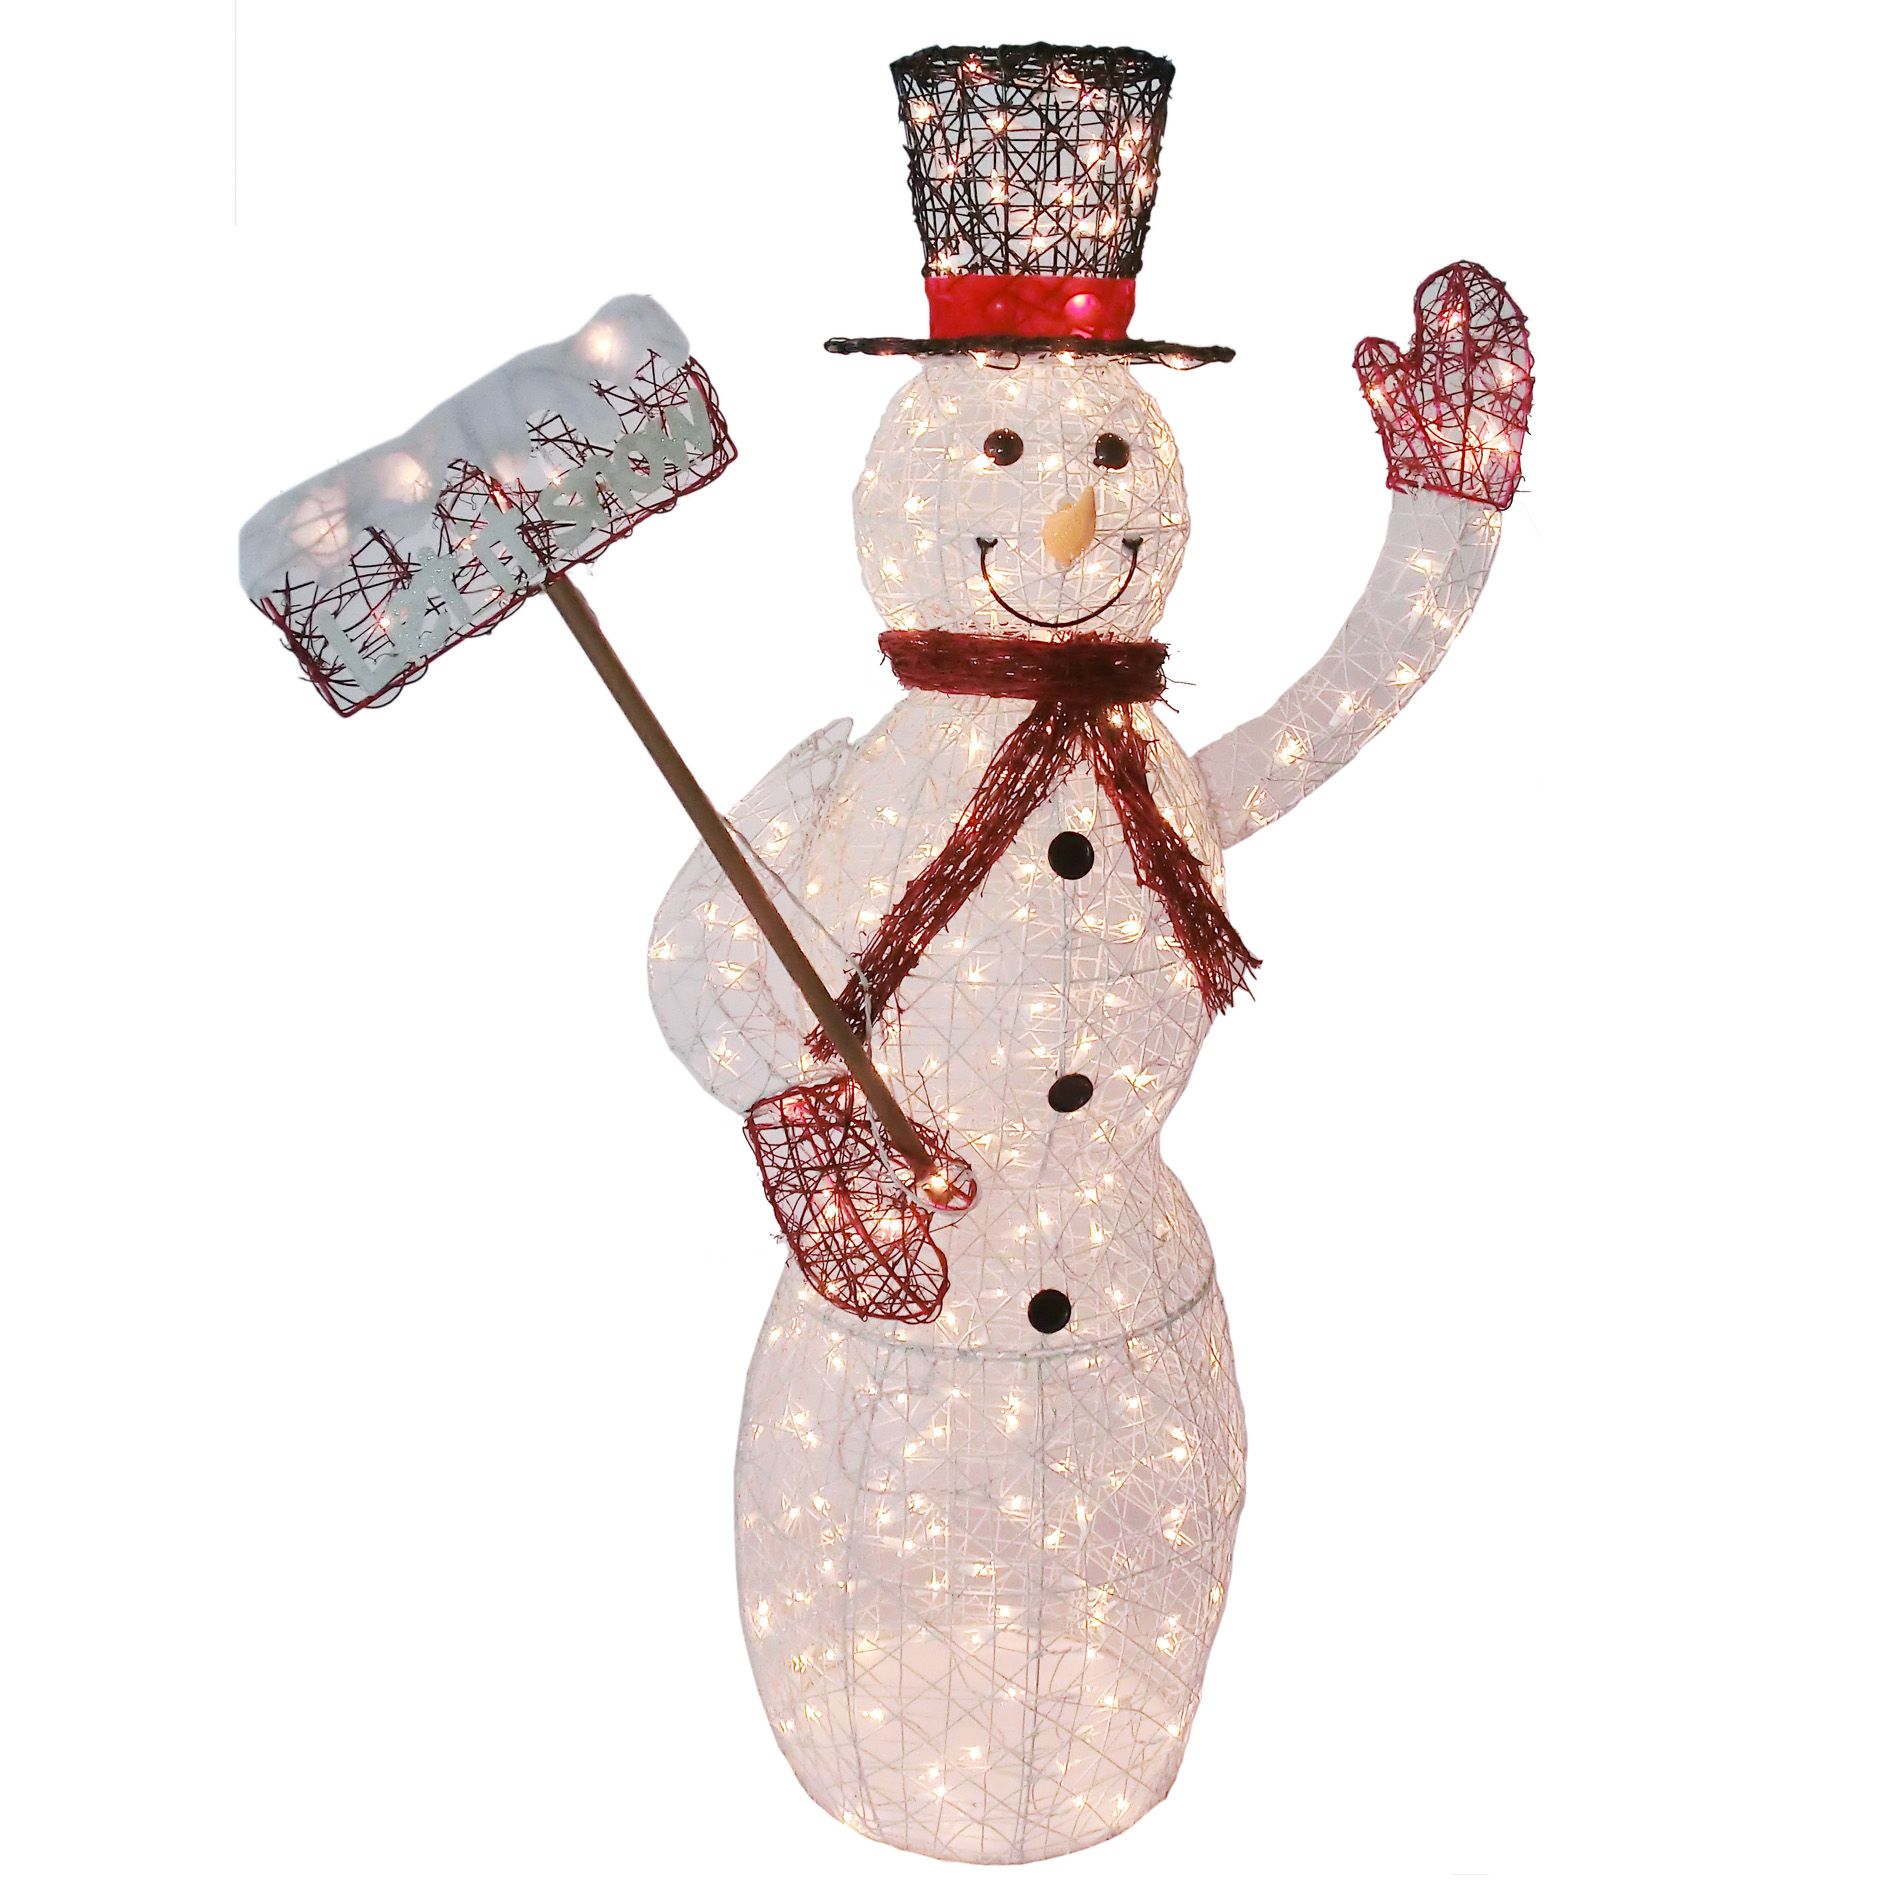 Lighted Vine Snowman Outdoor Christmas Decoration, 5 ft